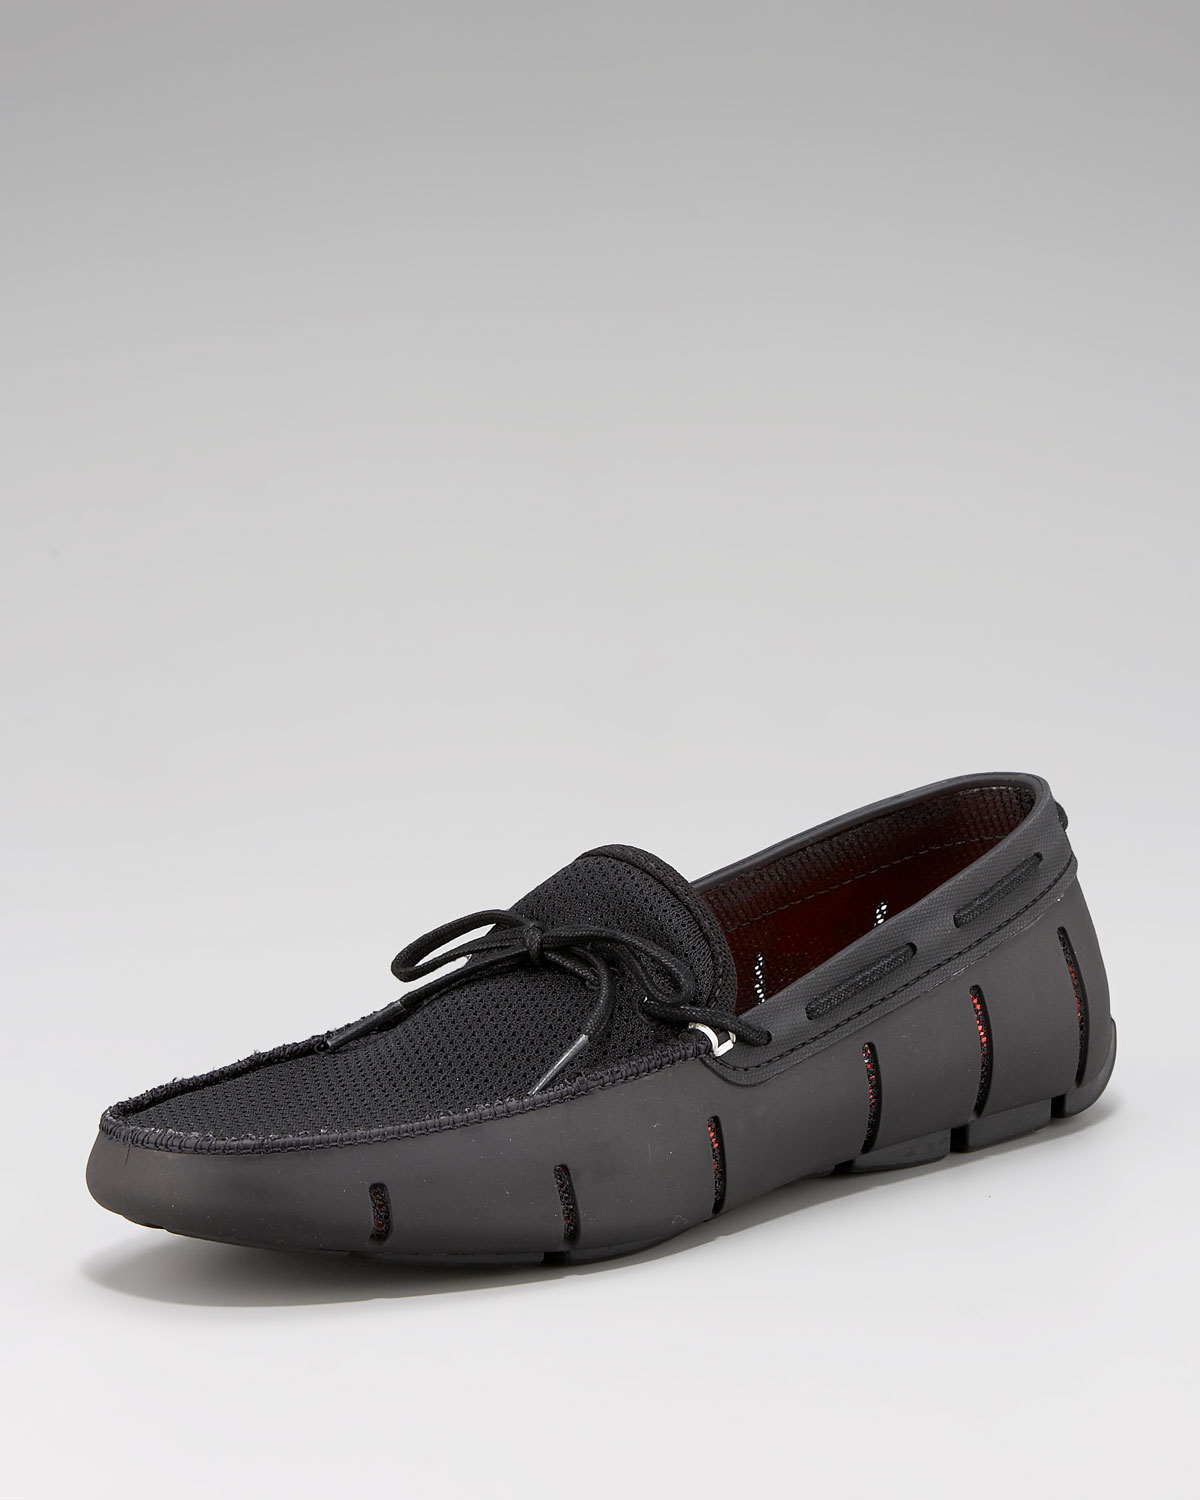 Swims Lace-up Rubber Loafer, Black for 